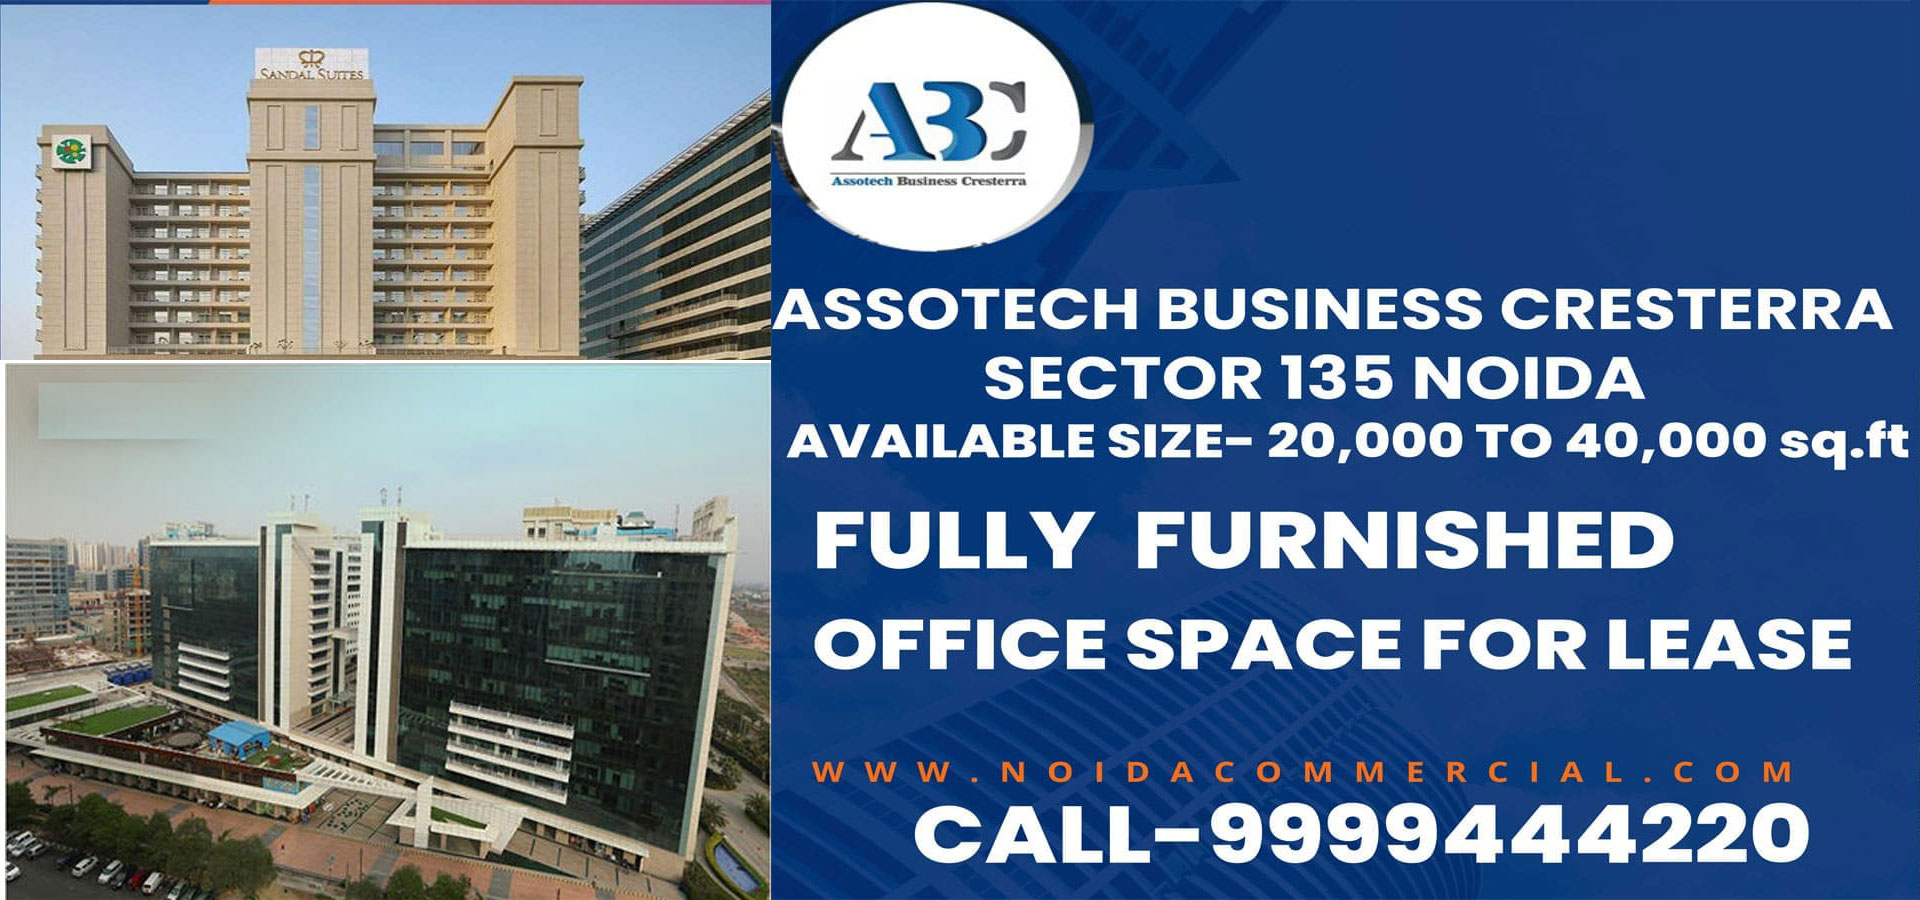 Assotech Business Cresterra: Office Space For Lease in Sector 135 Noida